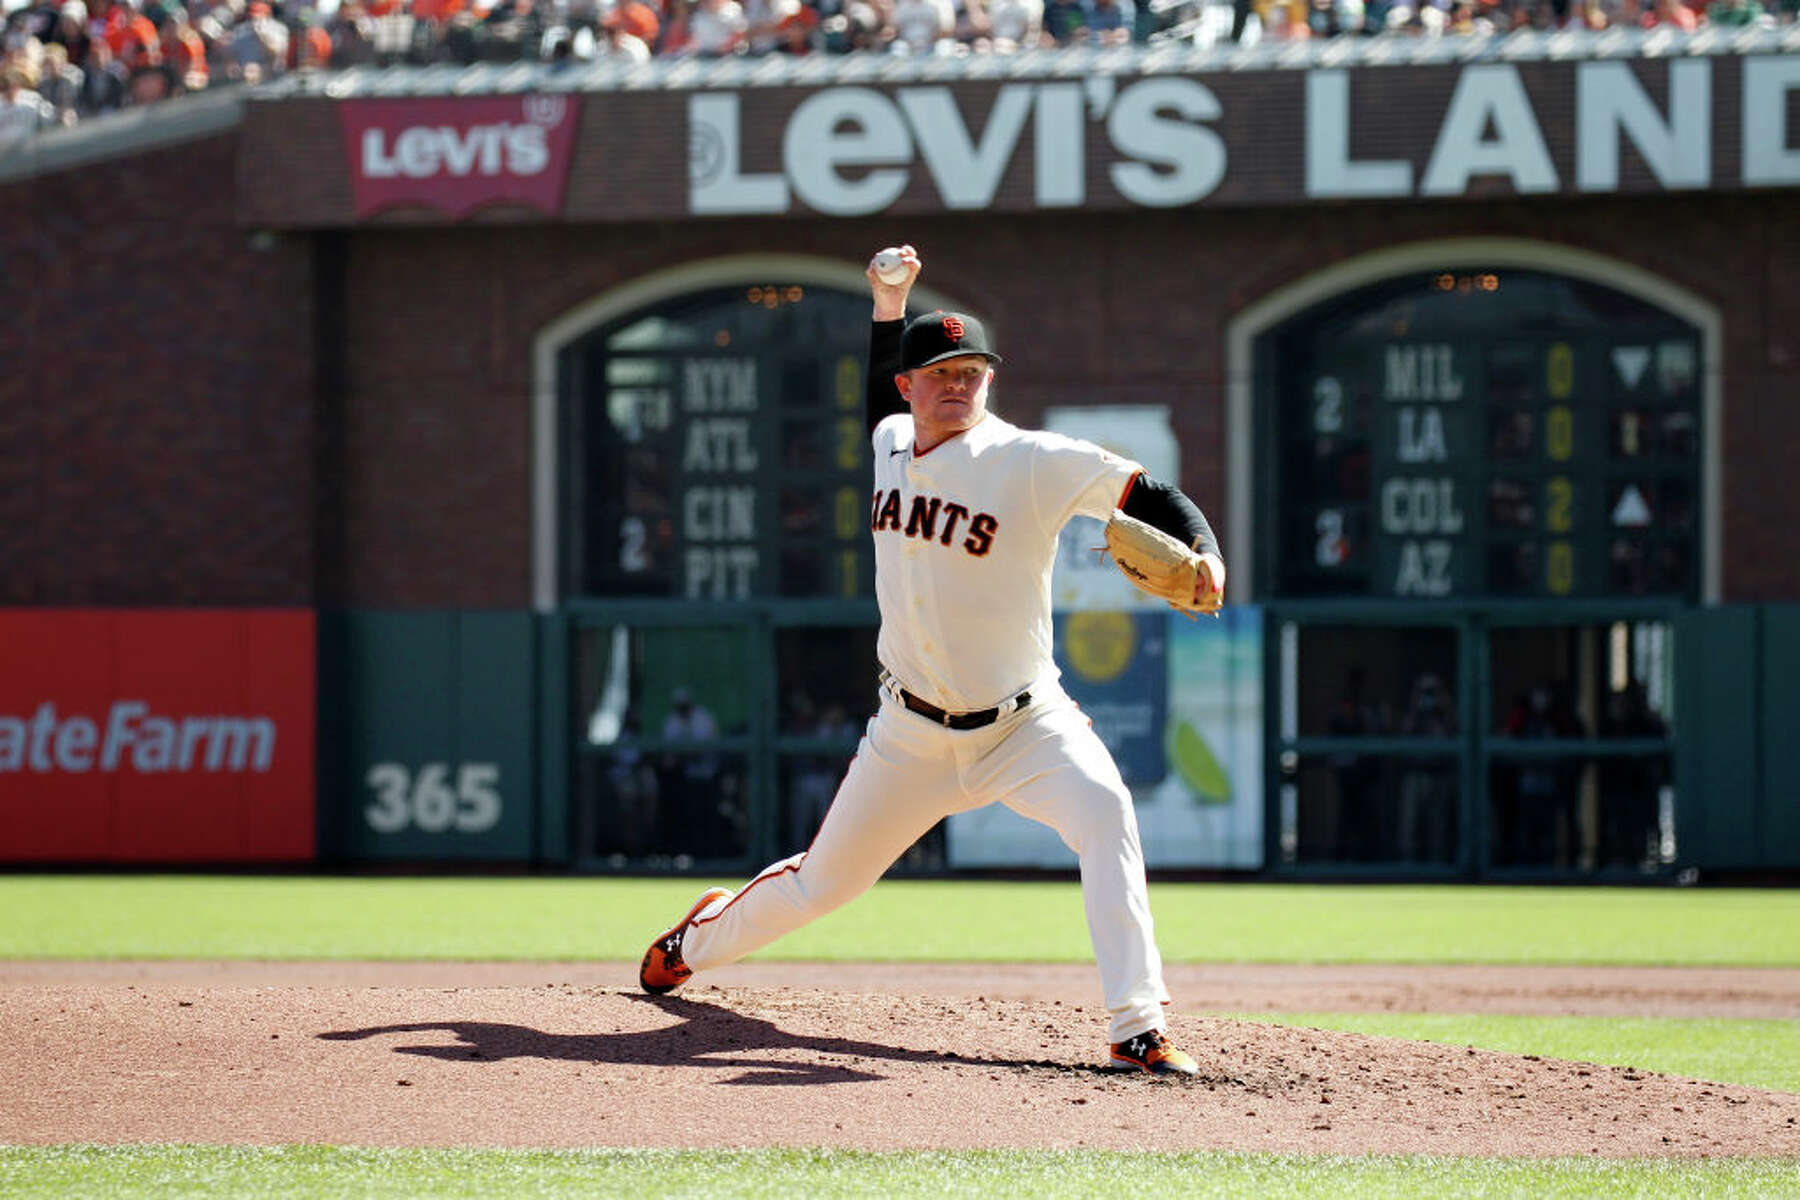 NLDS: With Logan Webb starting, how does the SF Giants pitching